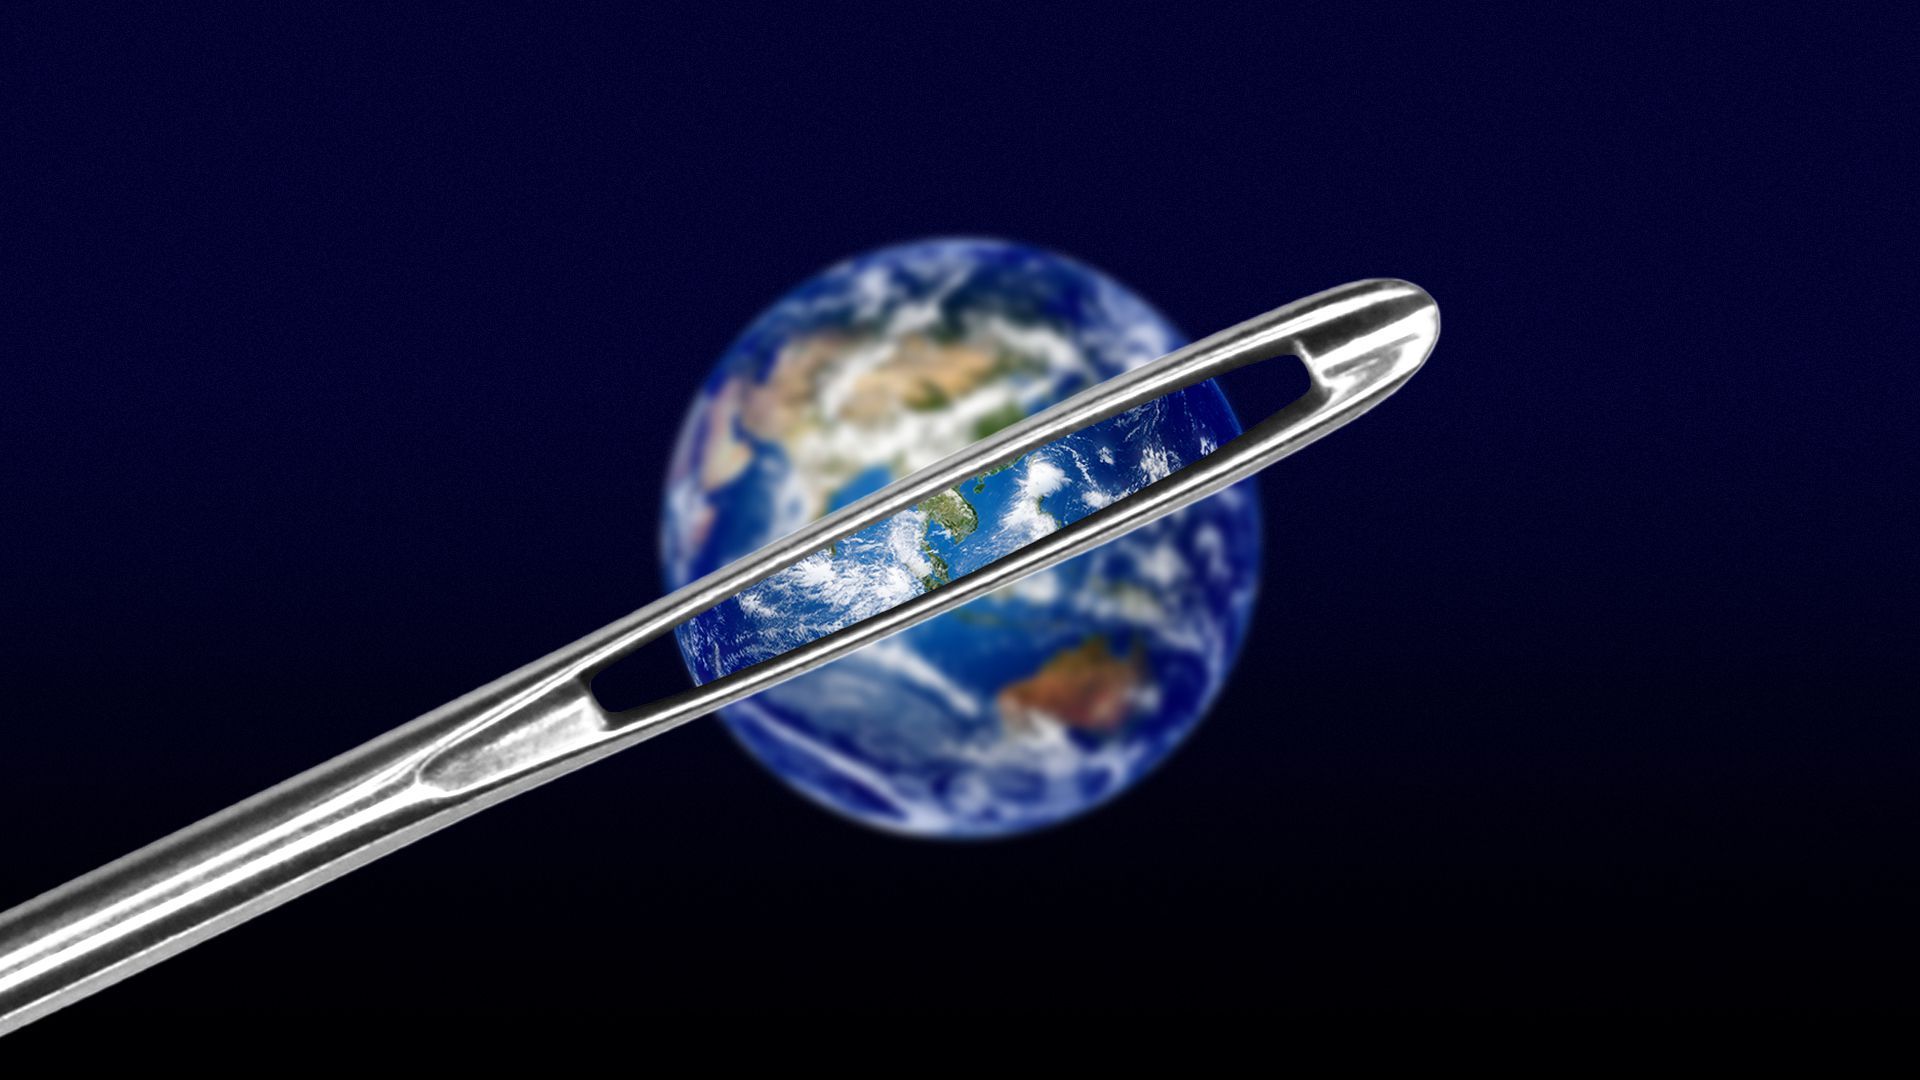 Illustration of the earth seen through the eye of a sewing needle